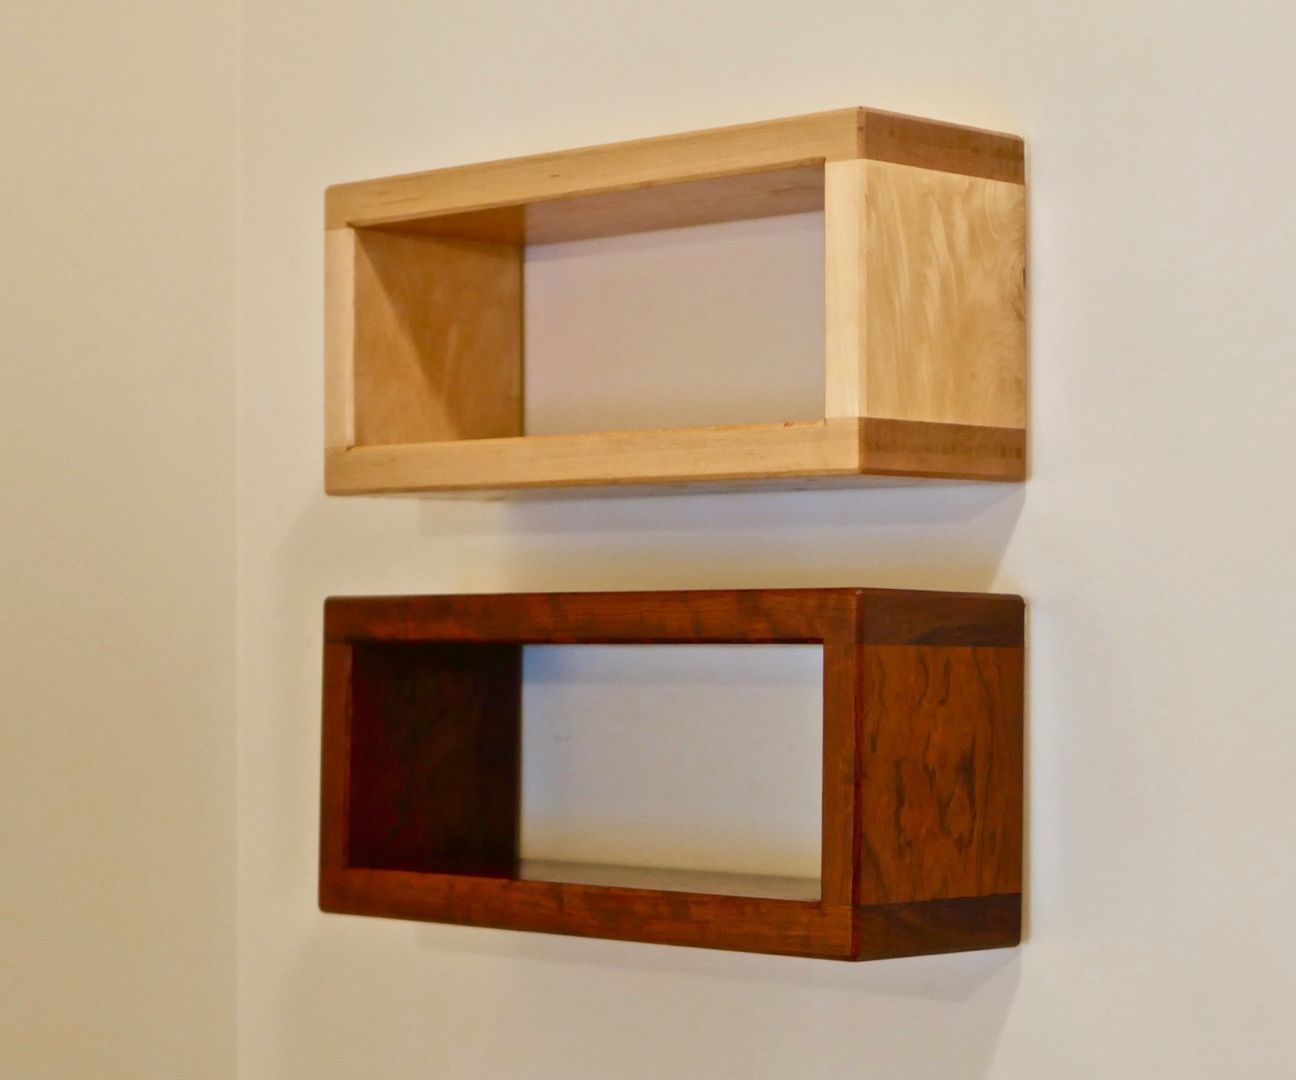 How to Build DIY Floating Shelf With Invisible Hardware